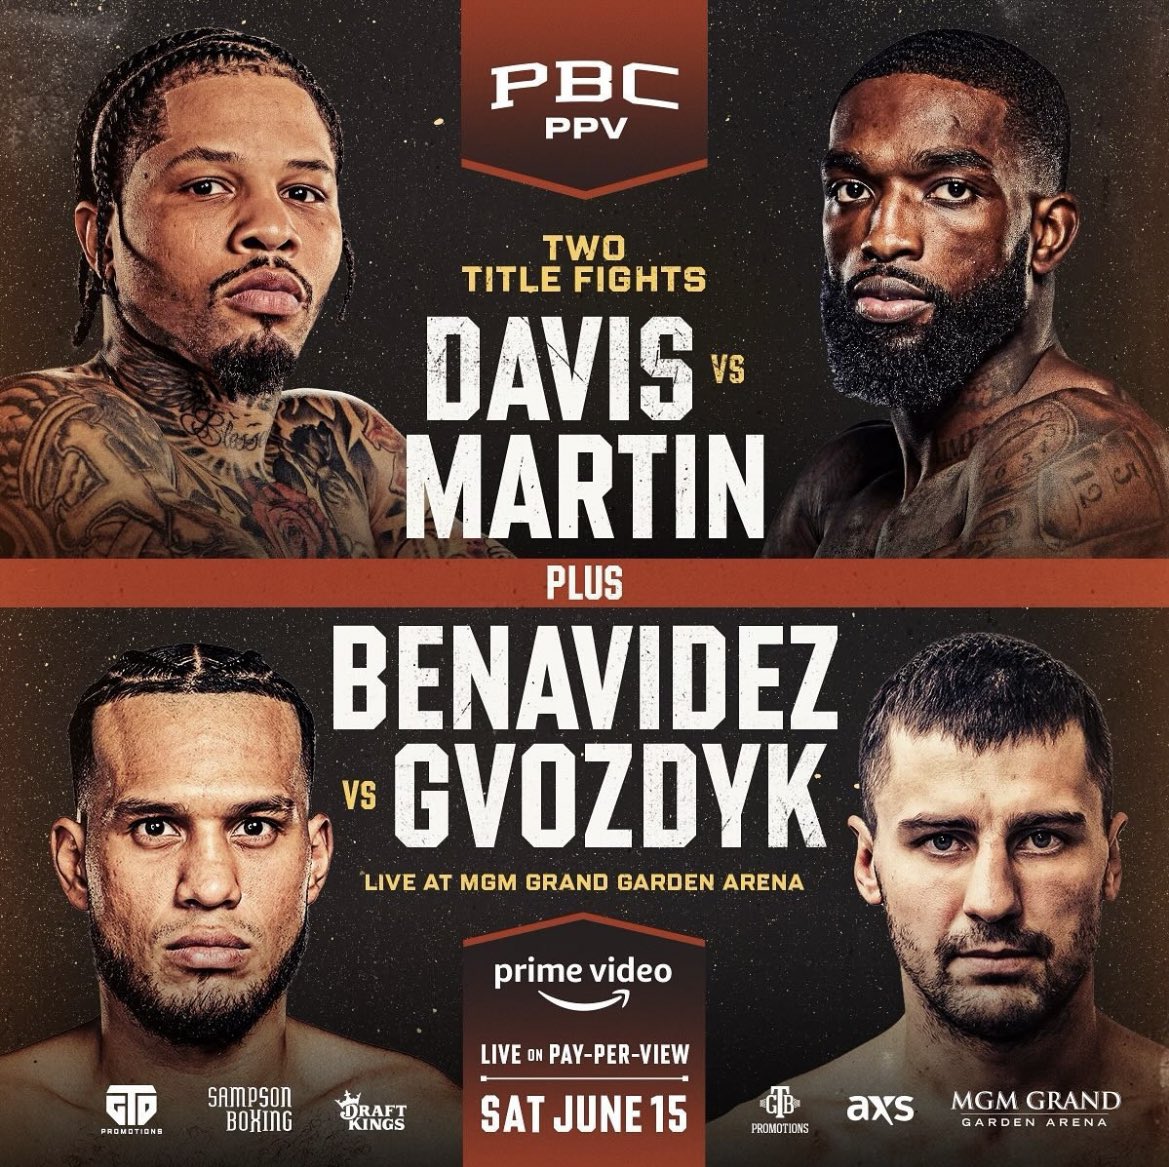 It’s official! It’s Tank vs. Ghost! #GervontaDavis’ first match since Ryan Garcia, he will face #FrankMartin on June 15 as he will defend his #WBA Lightweight title, as they headline the PBC PPV. 🥊 

#DavidBenavidez vs. #OleksandrGvozdyk is confirmed. #HouseofColors #PrimeVideo